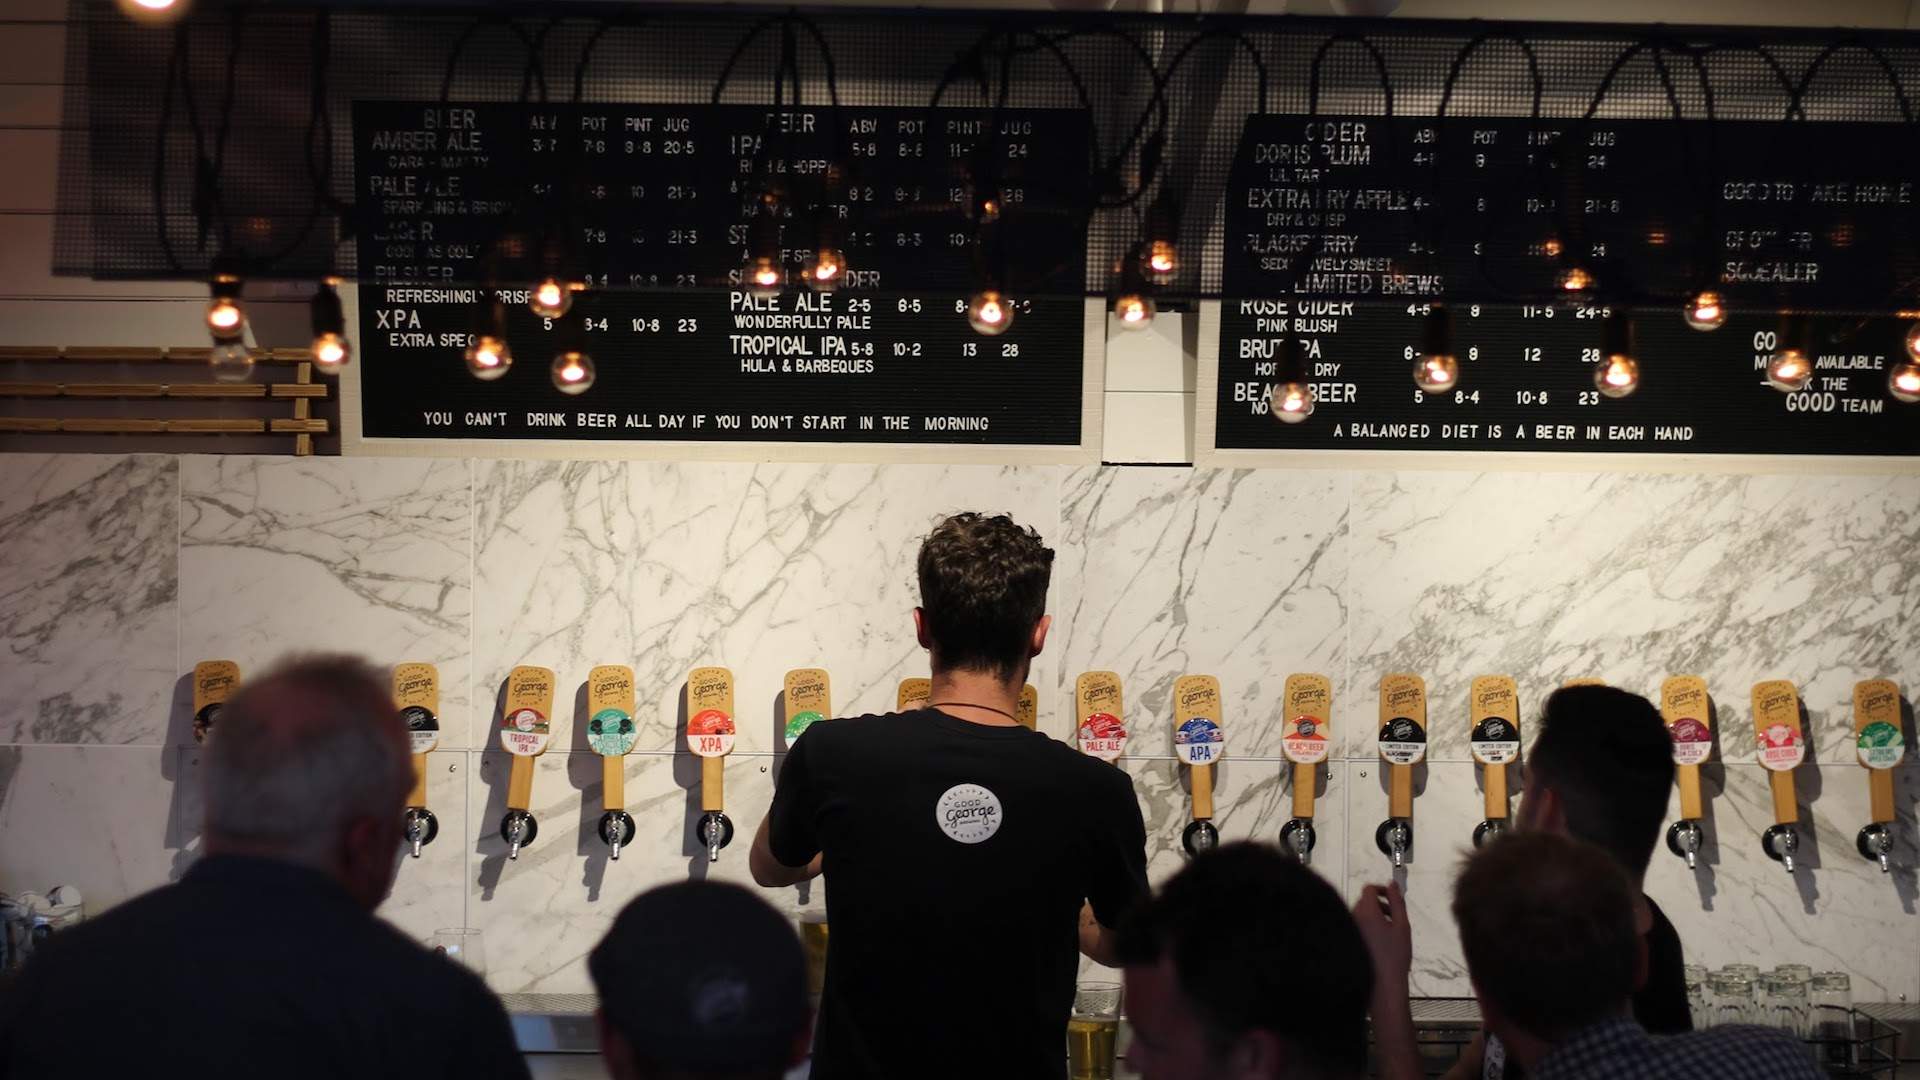 Hamilton Craft Brewery Good George Has Opened a Pub in Mission Bay